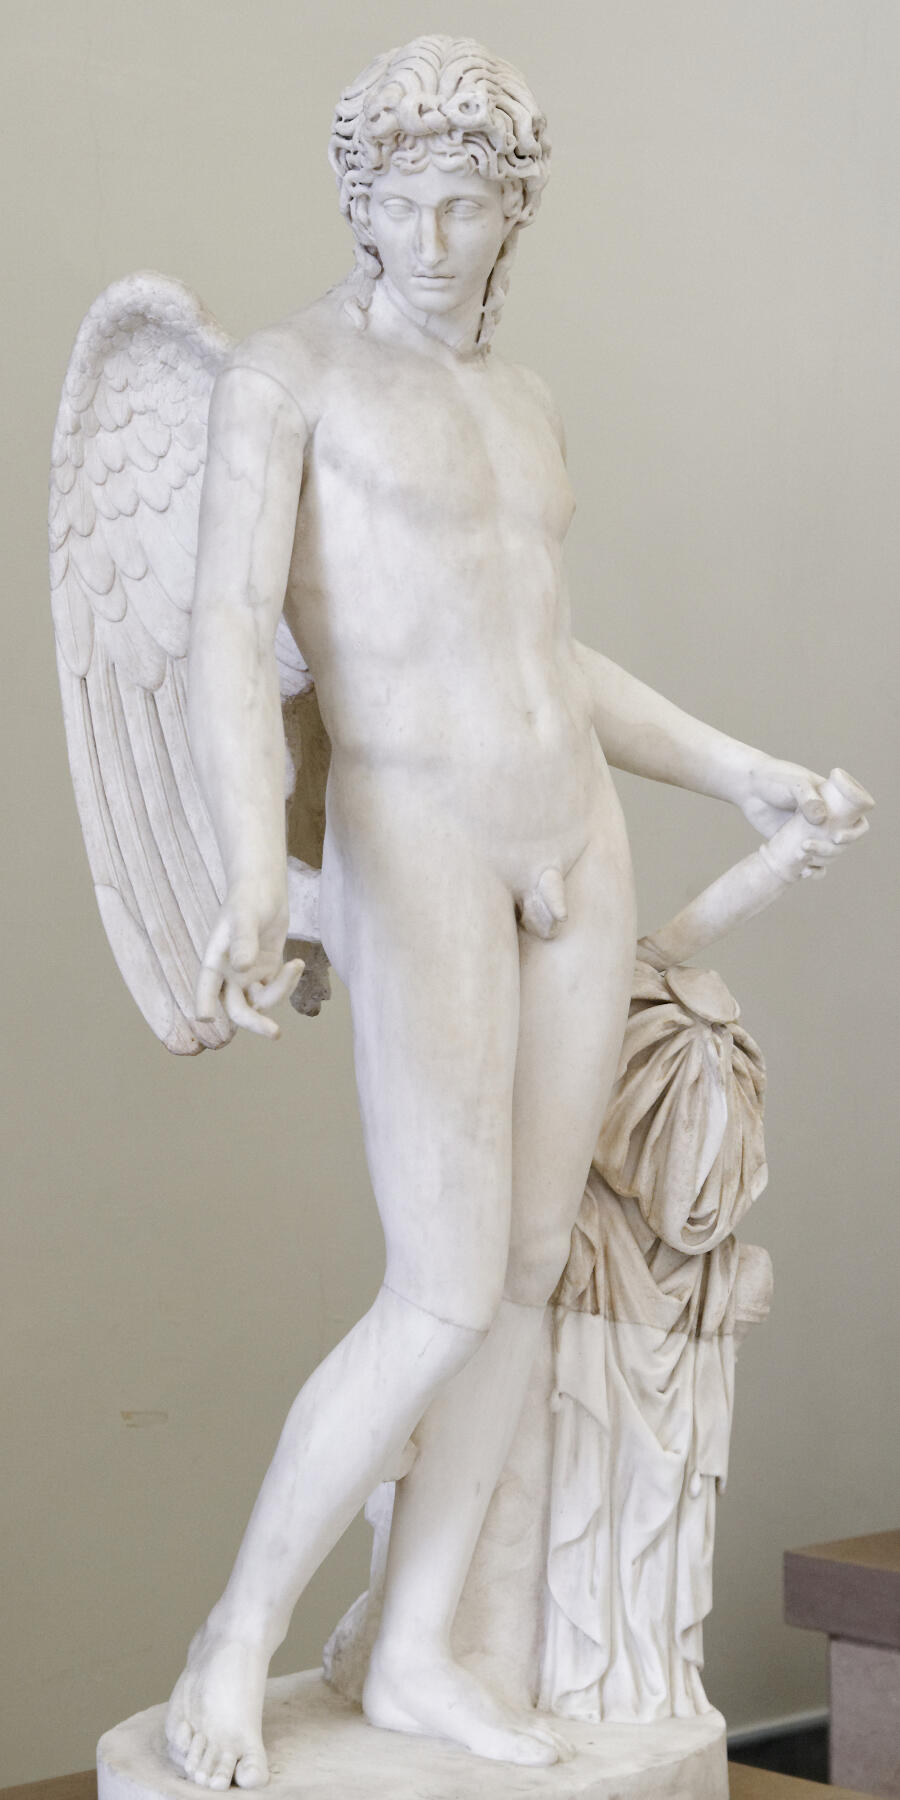 Eros Farnese of the Centocelle type, National Archaeological Museums of Naples, Marie-Lan Nguyen / Wikimedia Commons CC BY